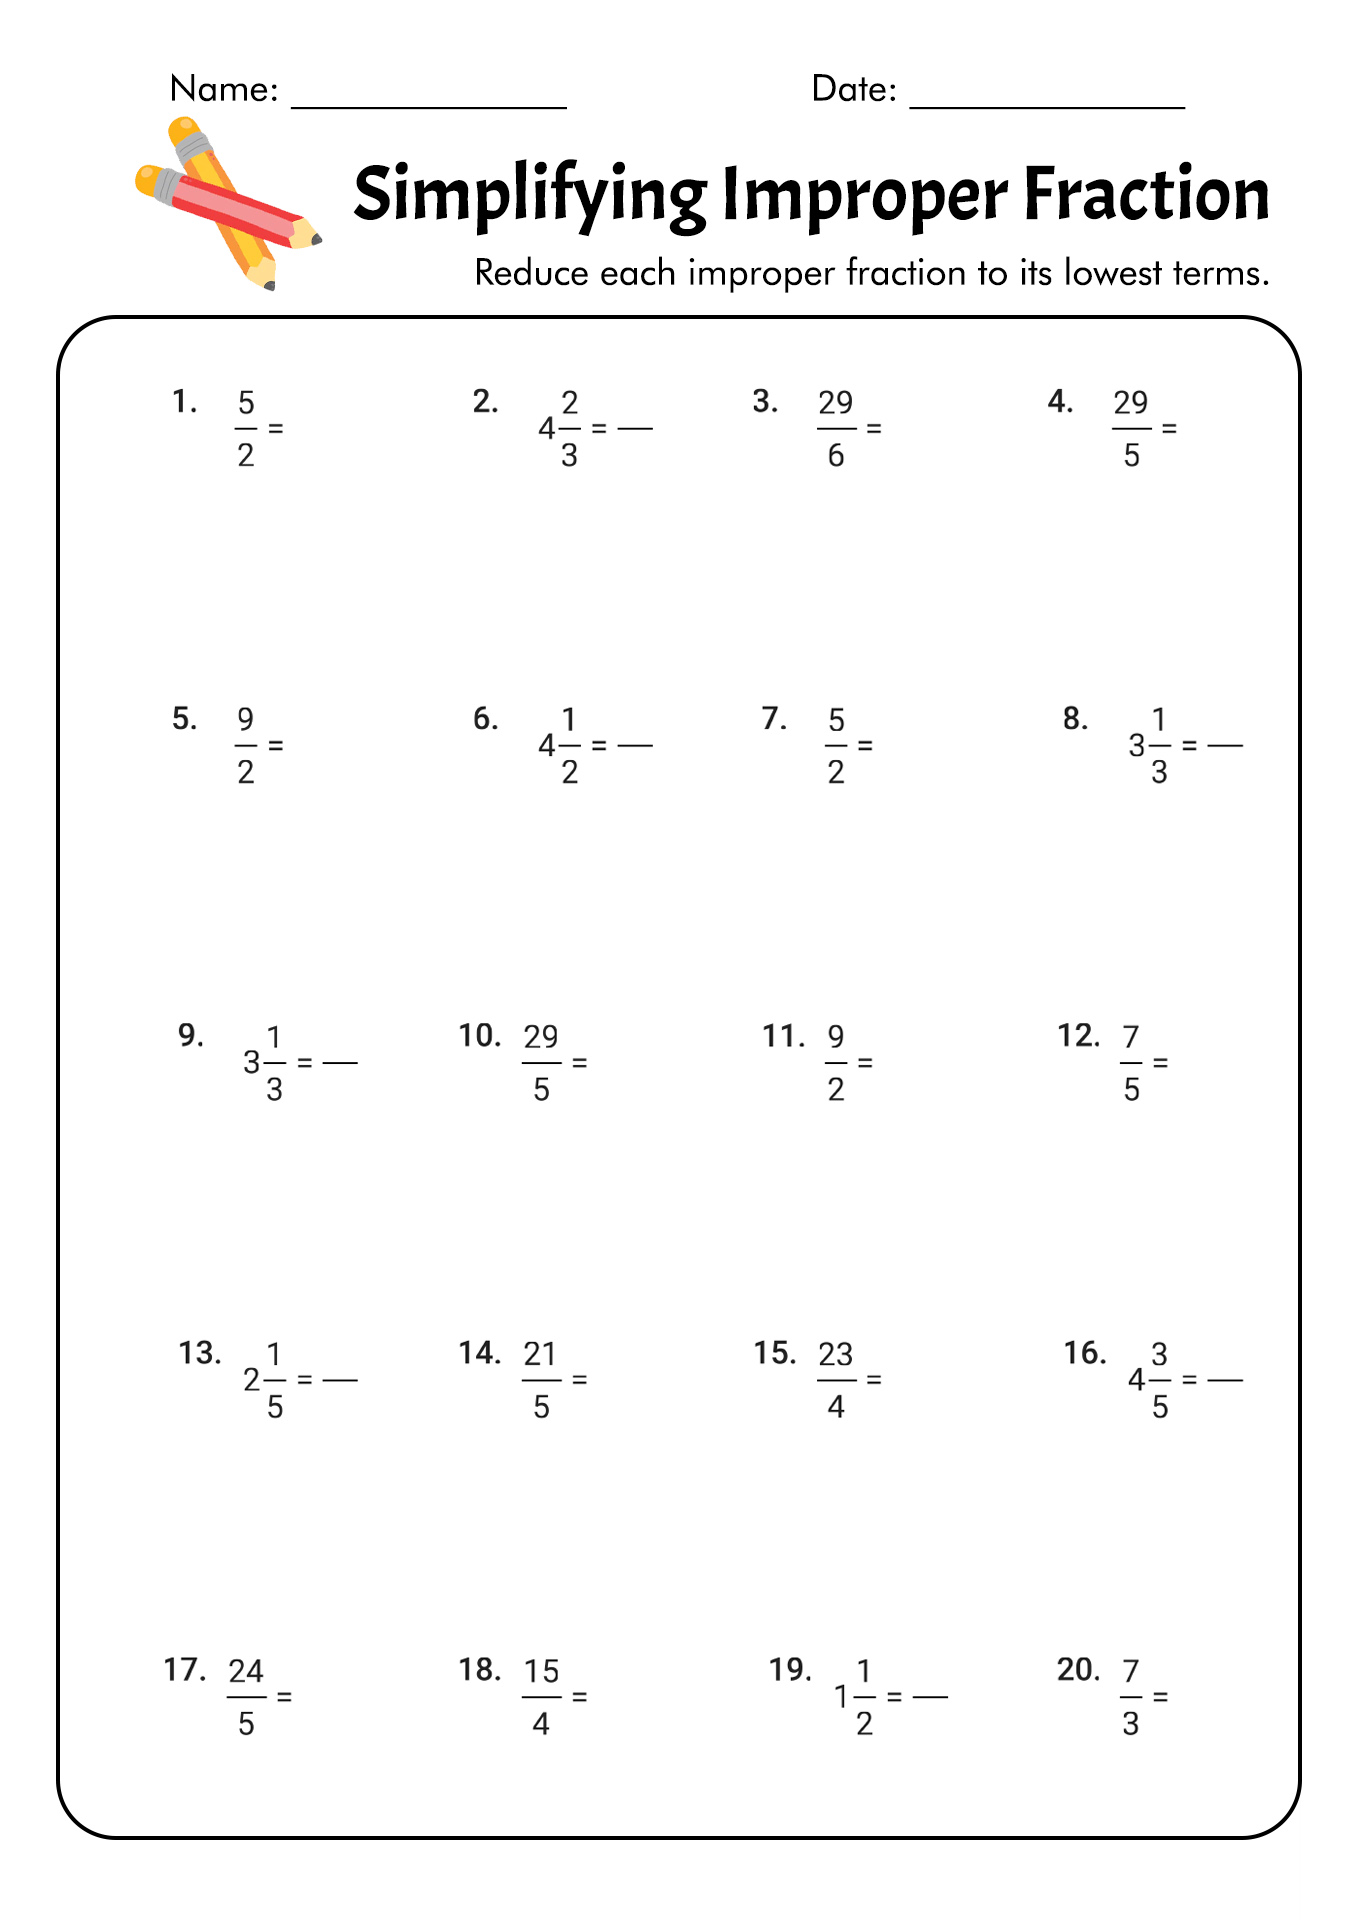 16 Best Images of Simplifying Fractions Worksheets Grade 6 - 6th Grade